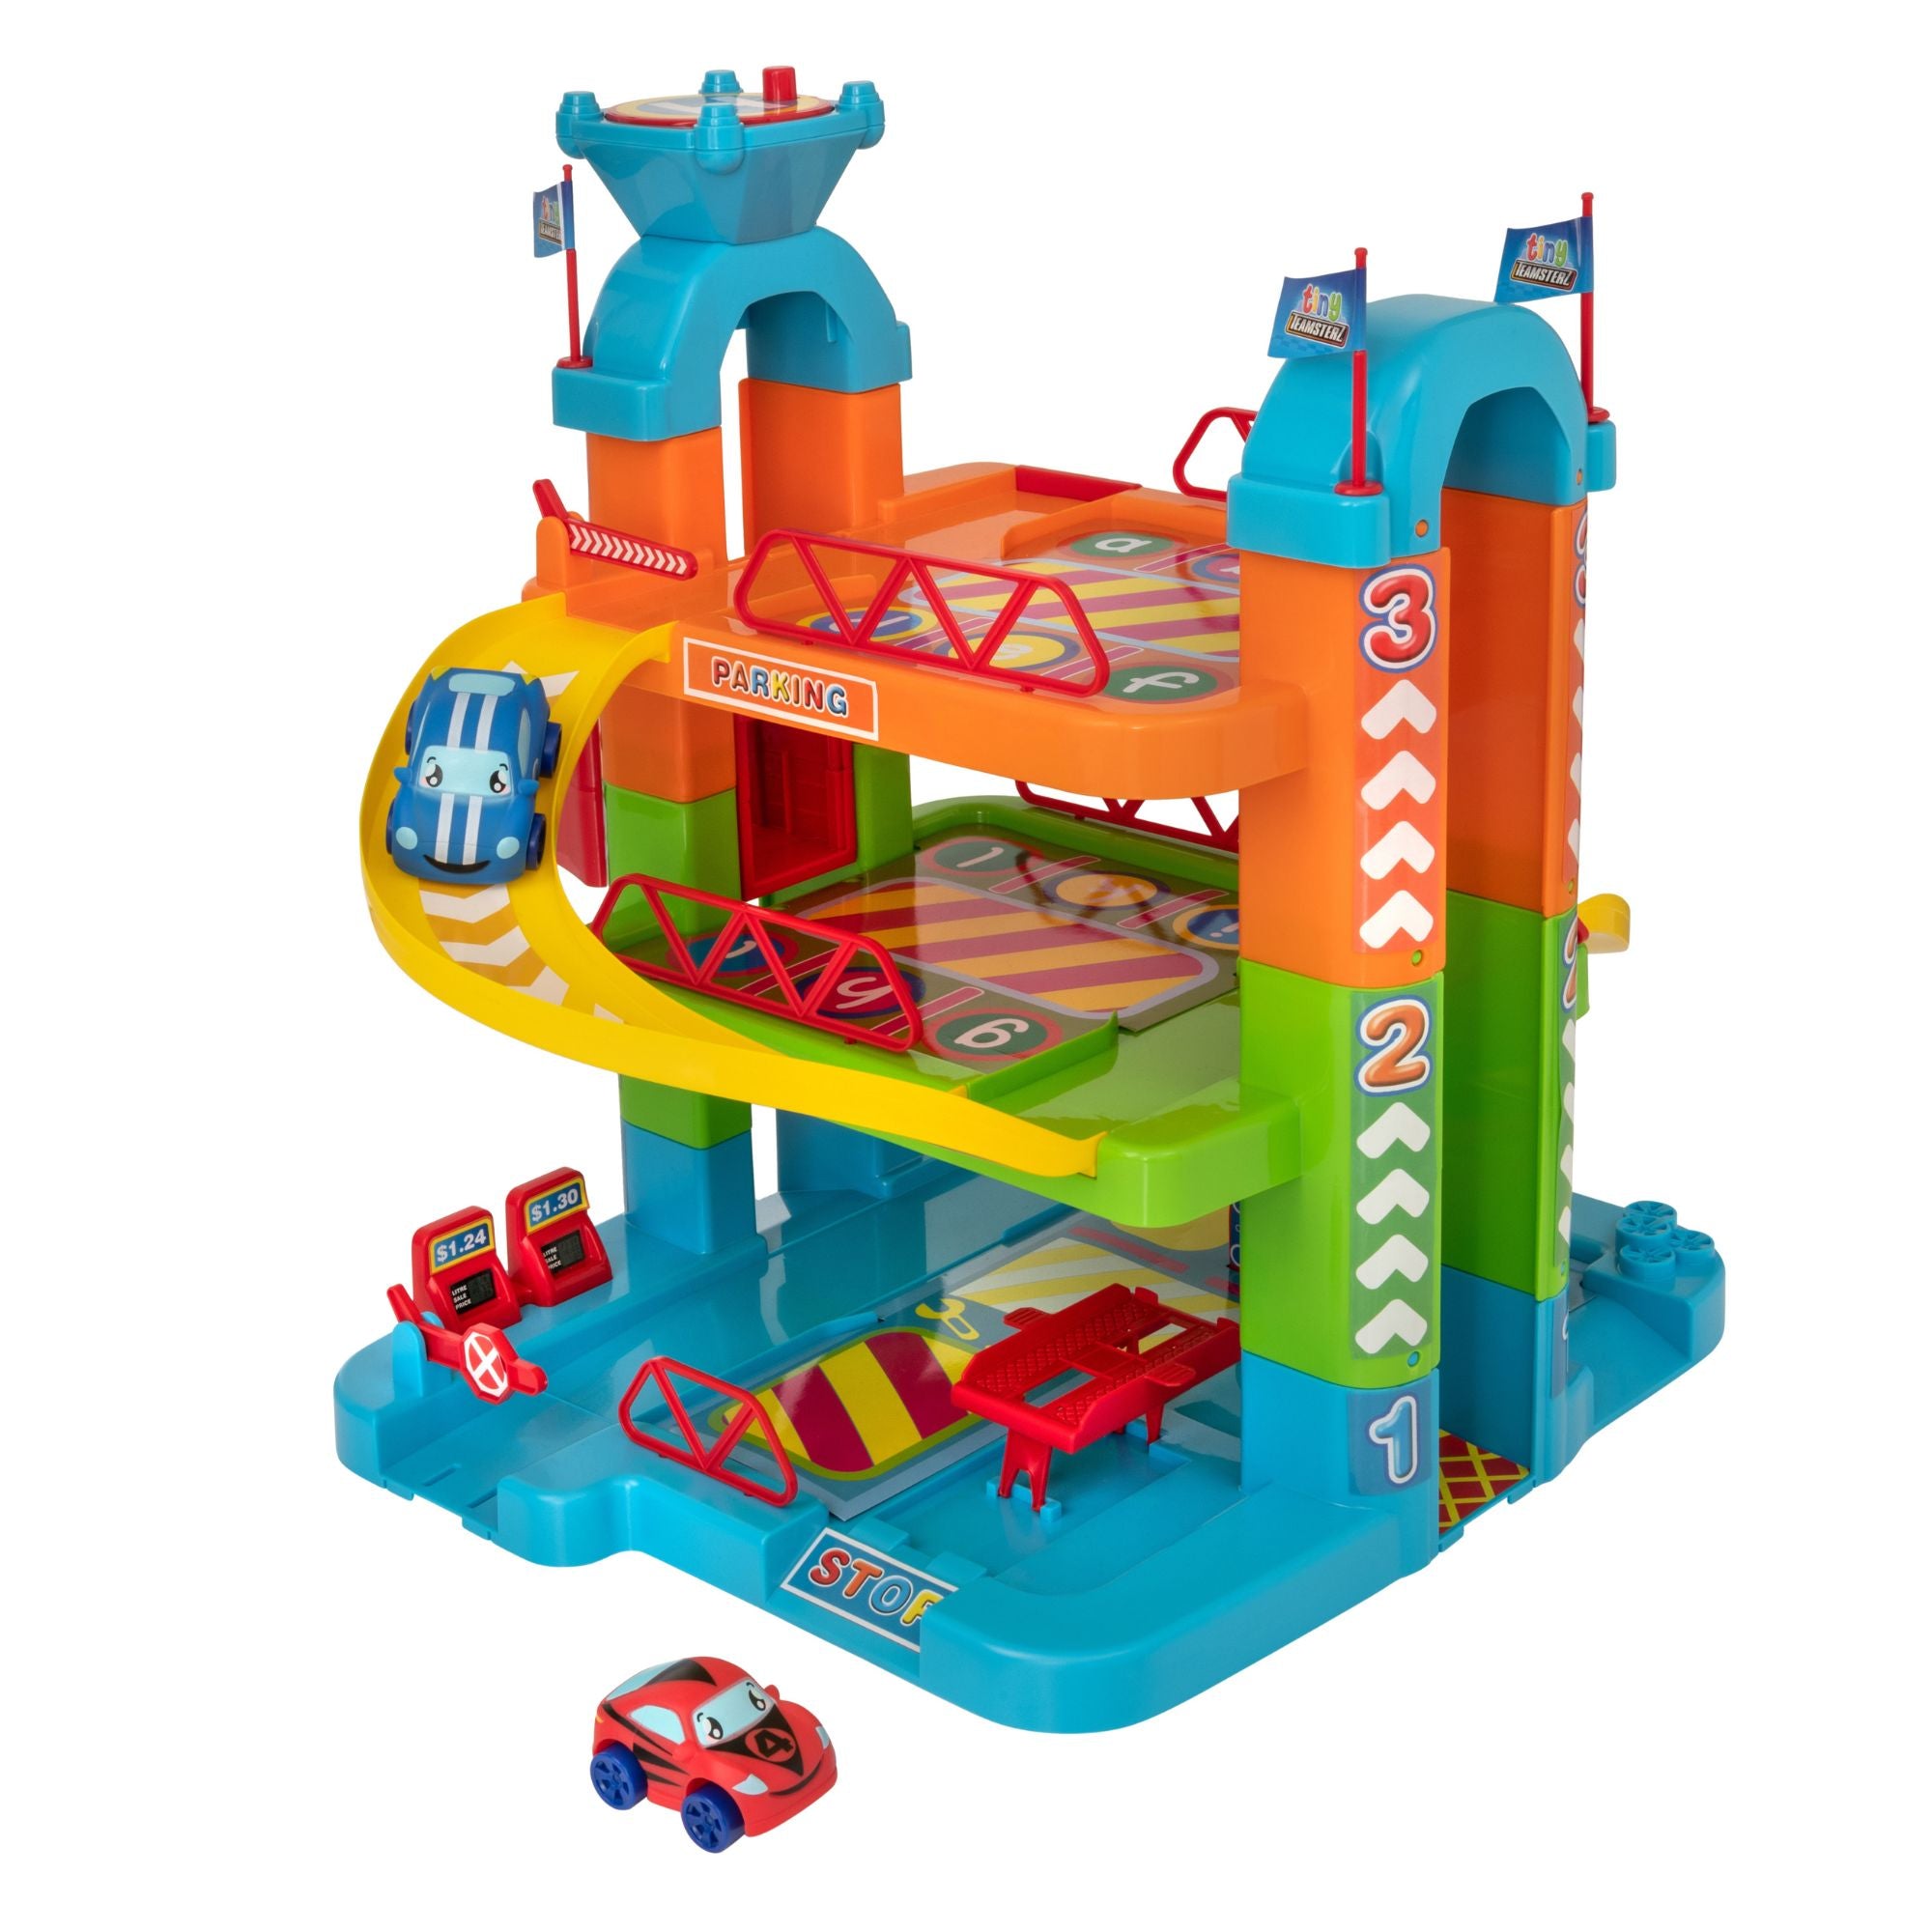 Tiny Teamsterz Tower Garage | Includes 1 Soft Touch Cars